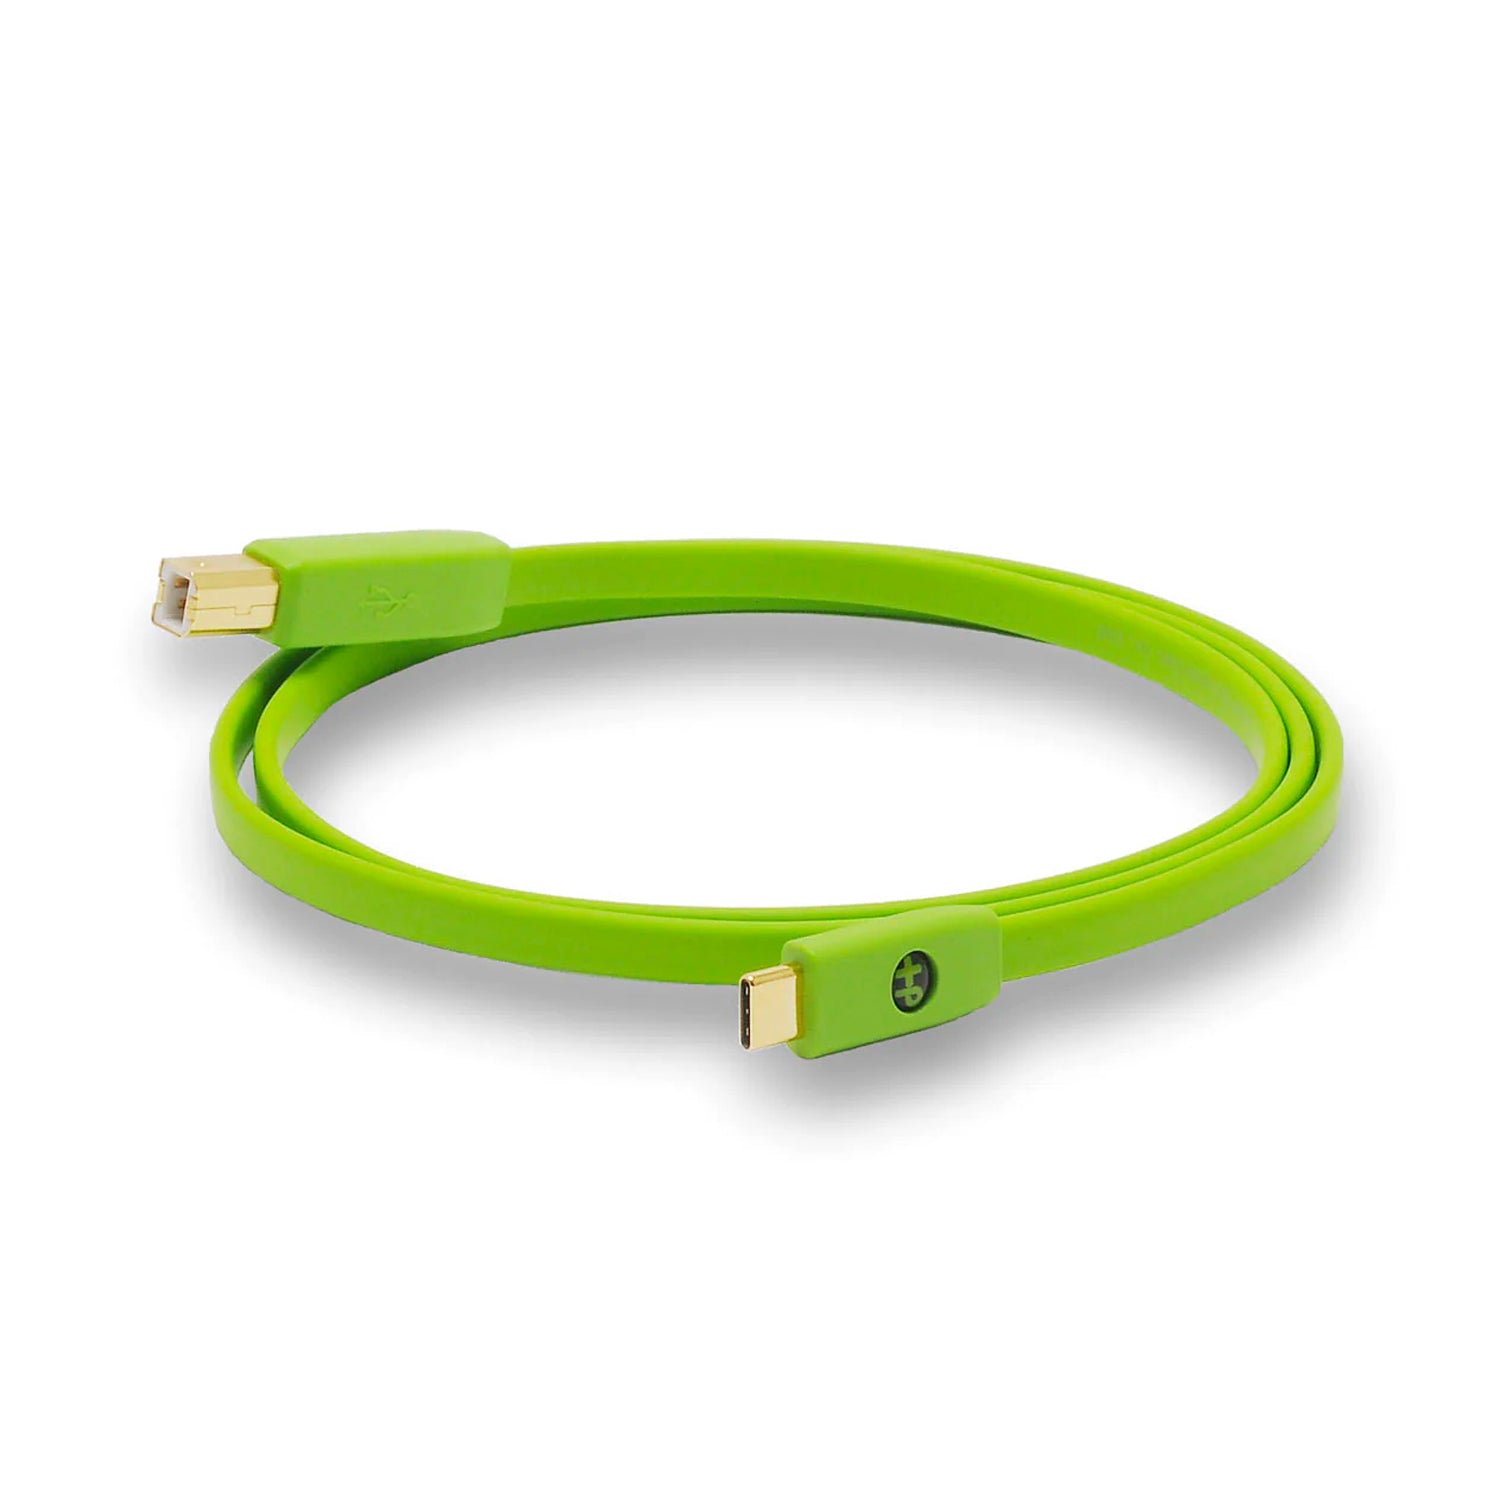 Oyaide NEO d+ Class B USB 2.0 Type-C to Type-B Cable